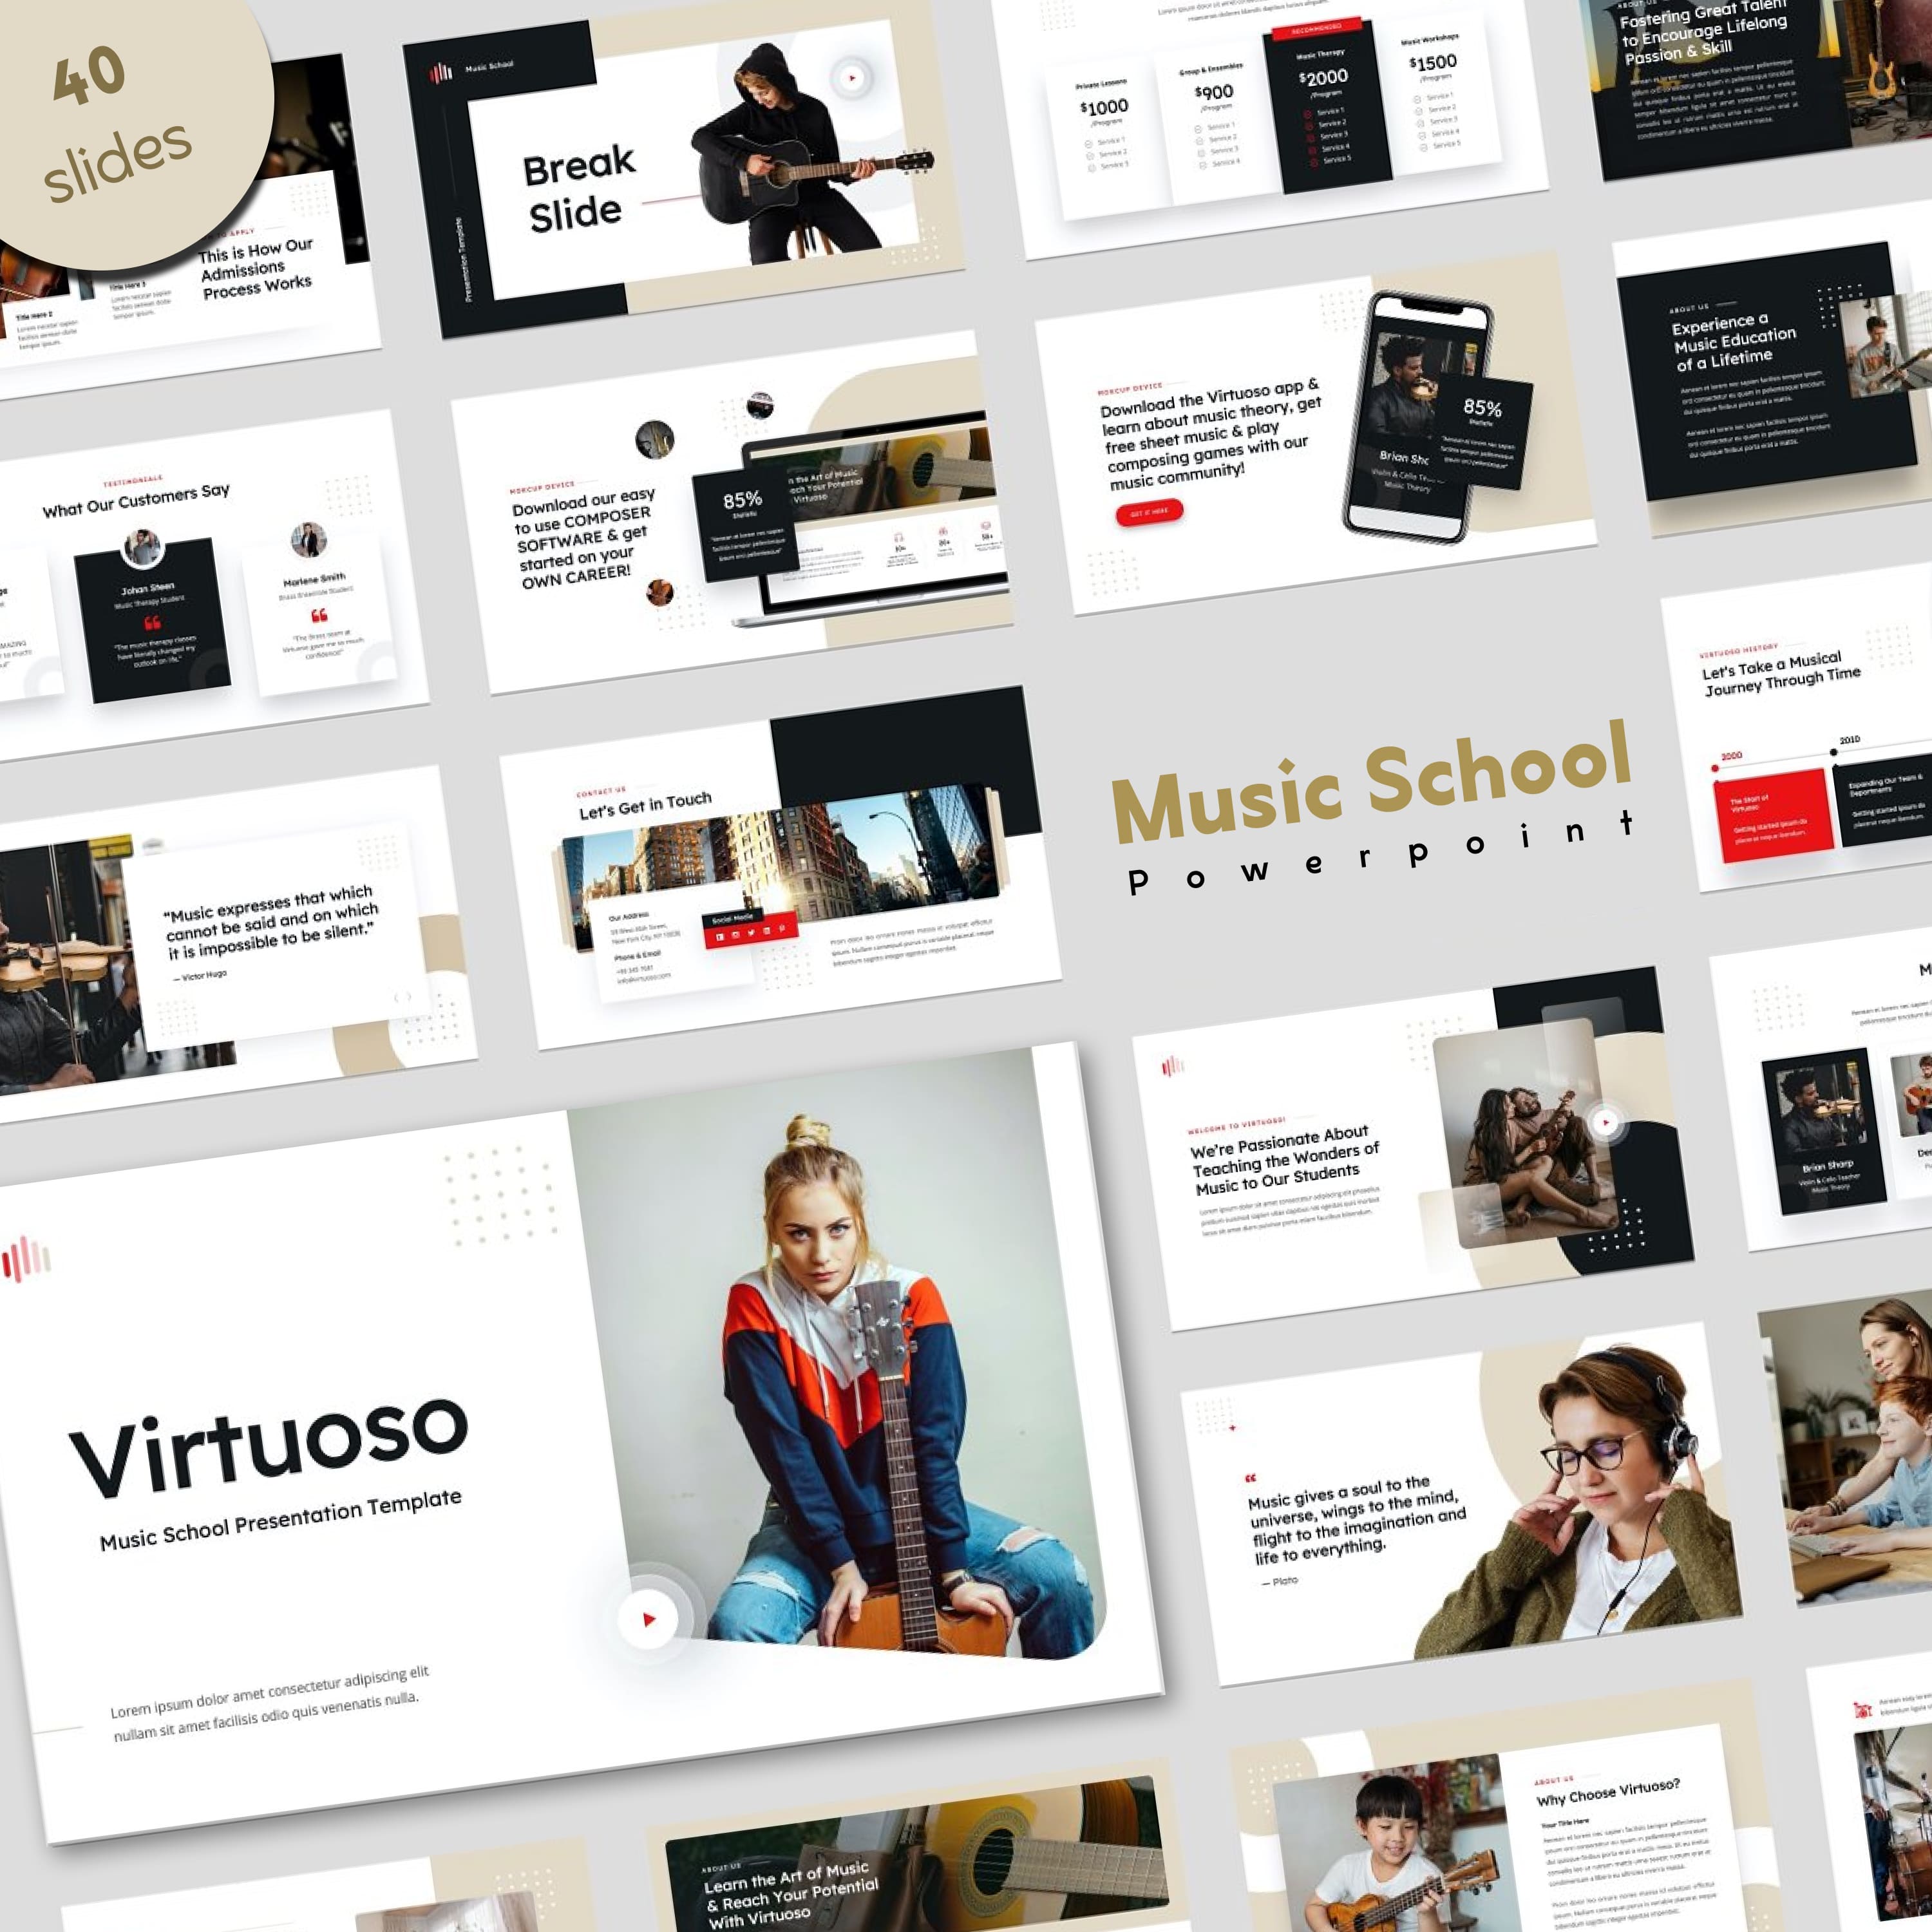 Music School PowerPoint cover.